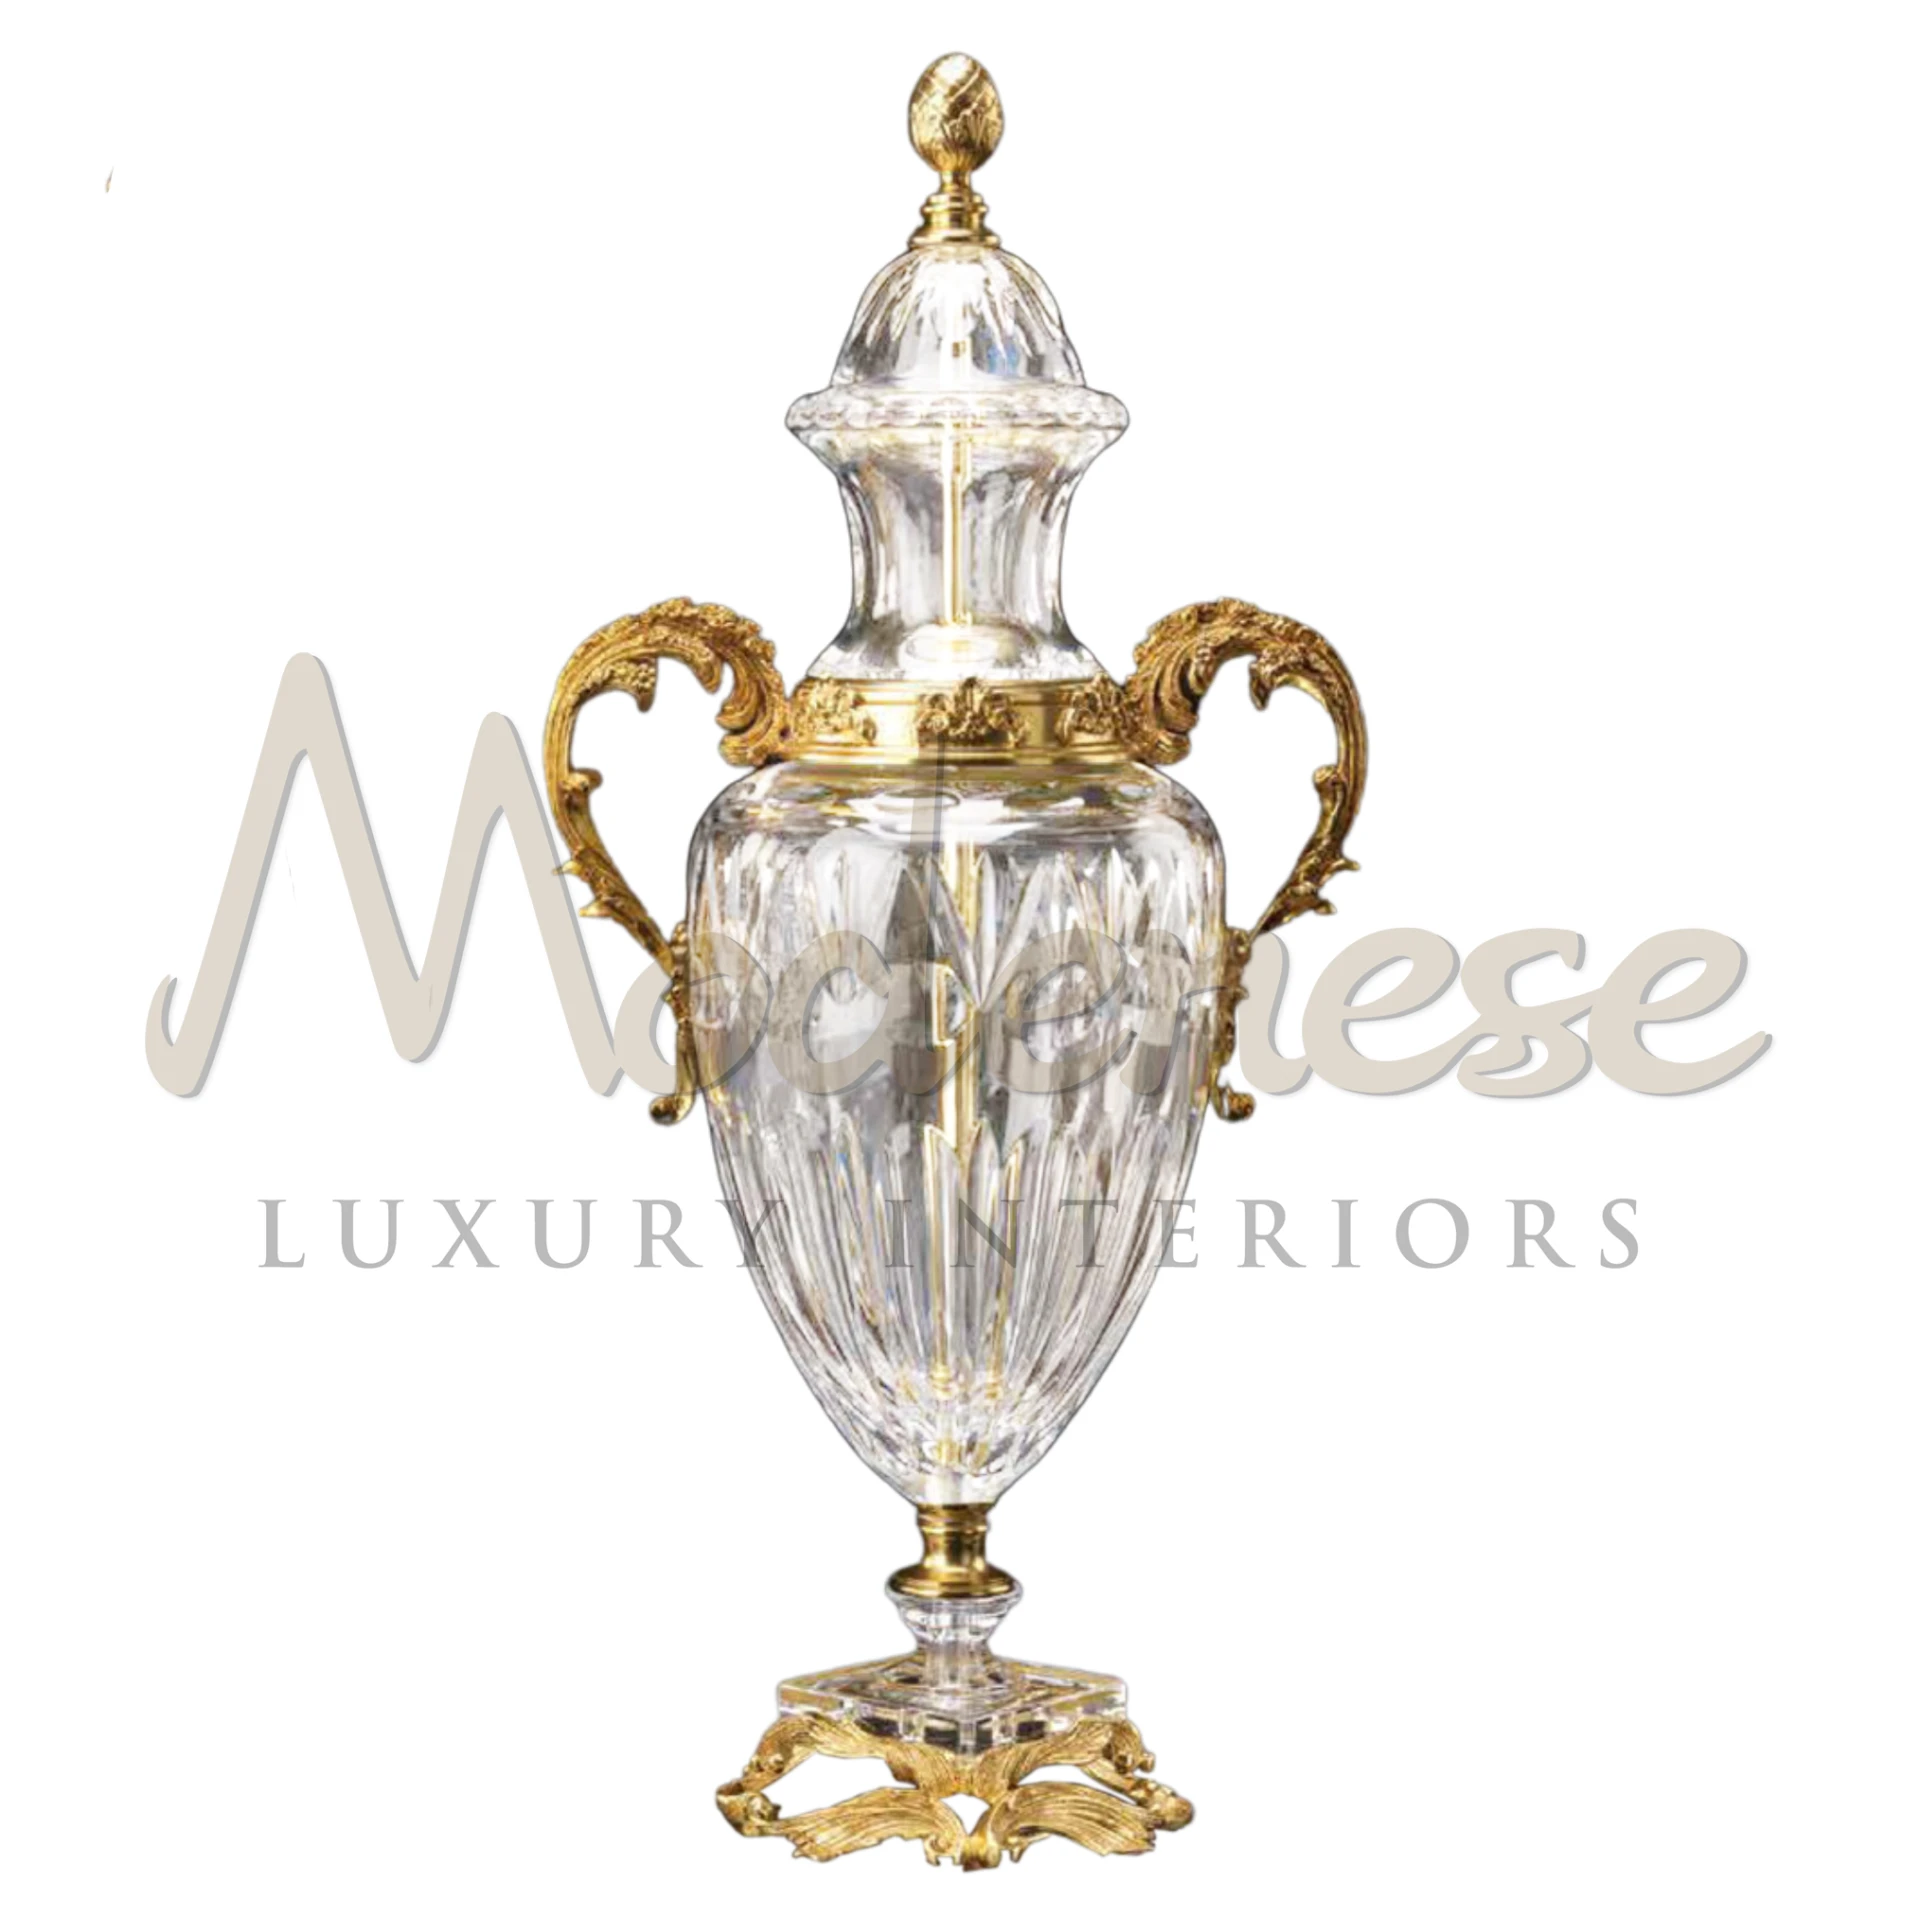 Modenese Luxury Crystal Amphora, showcasing intricate detailing and classical style, ideal for adding timeless elegance to any interior.